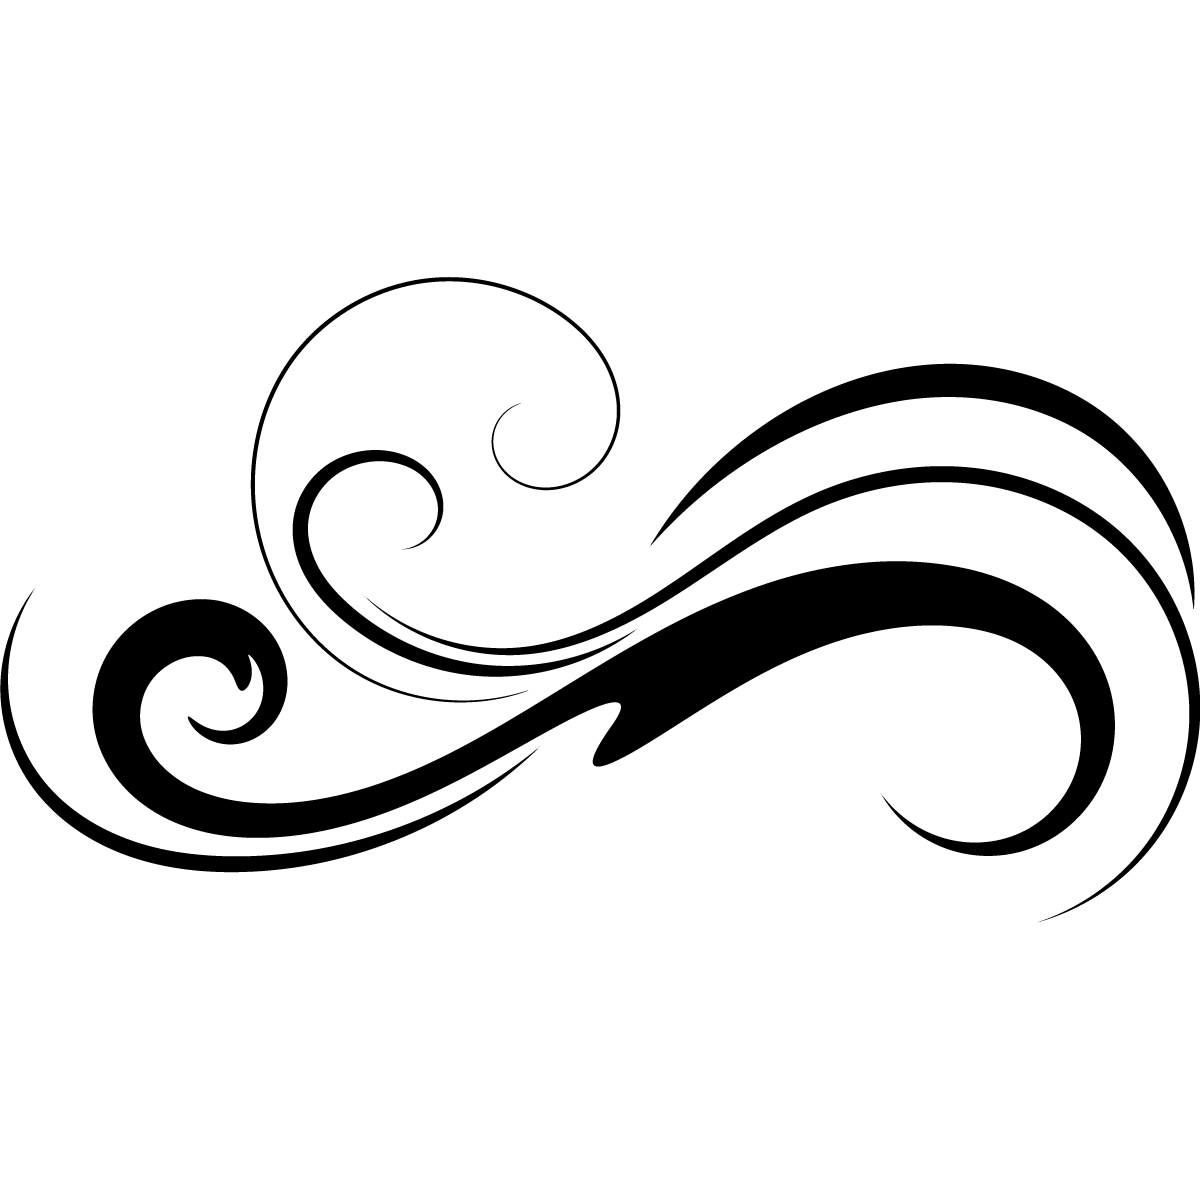 Collection of Squiggly clipart | Free download best Squiggly clipart on